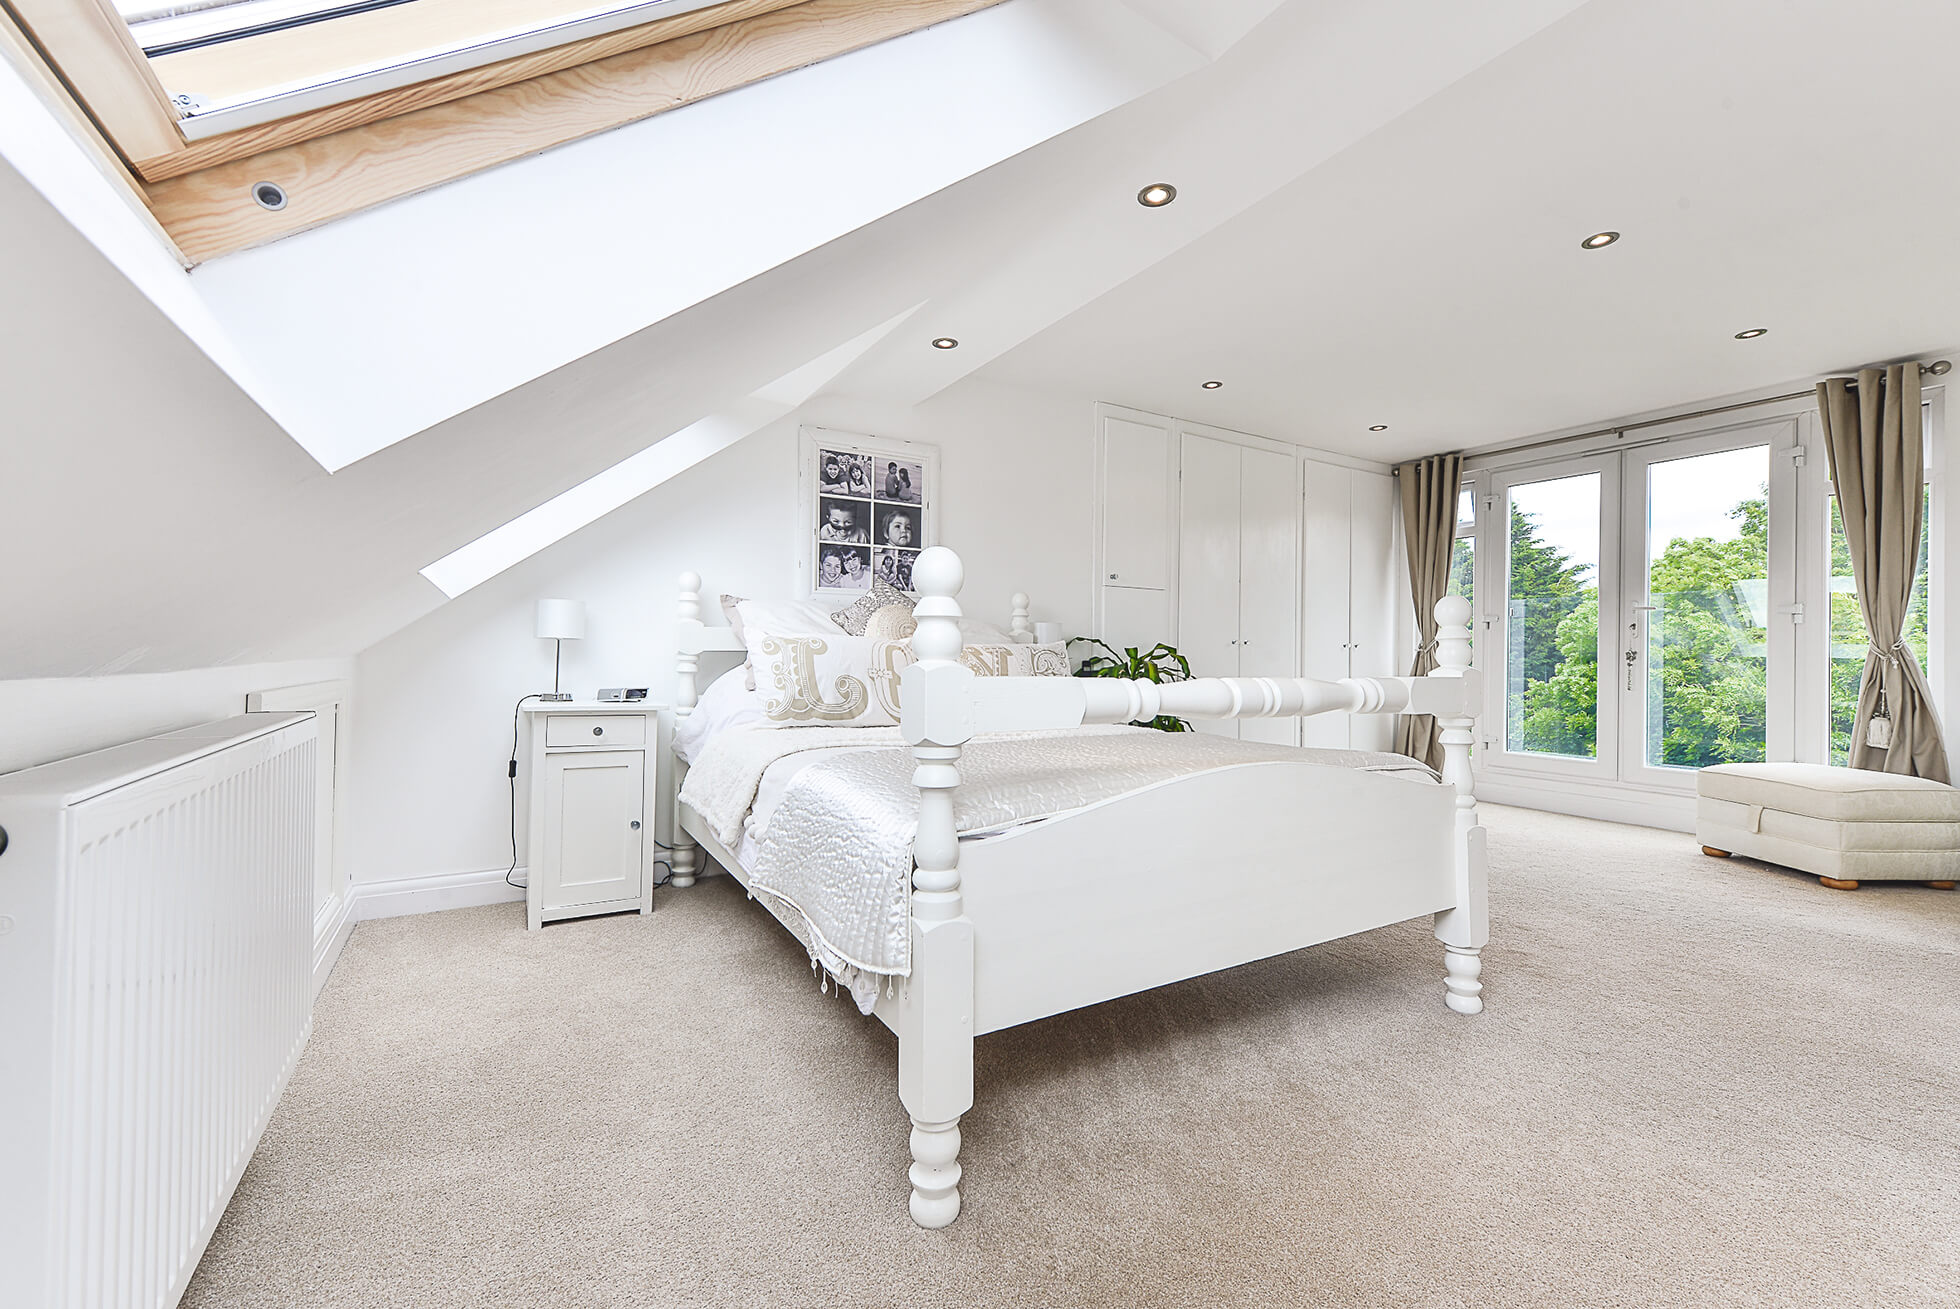 Do you have a question about converting your Loft in Datchworth? Here are the most popular questions asked by our clients.